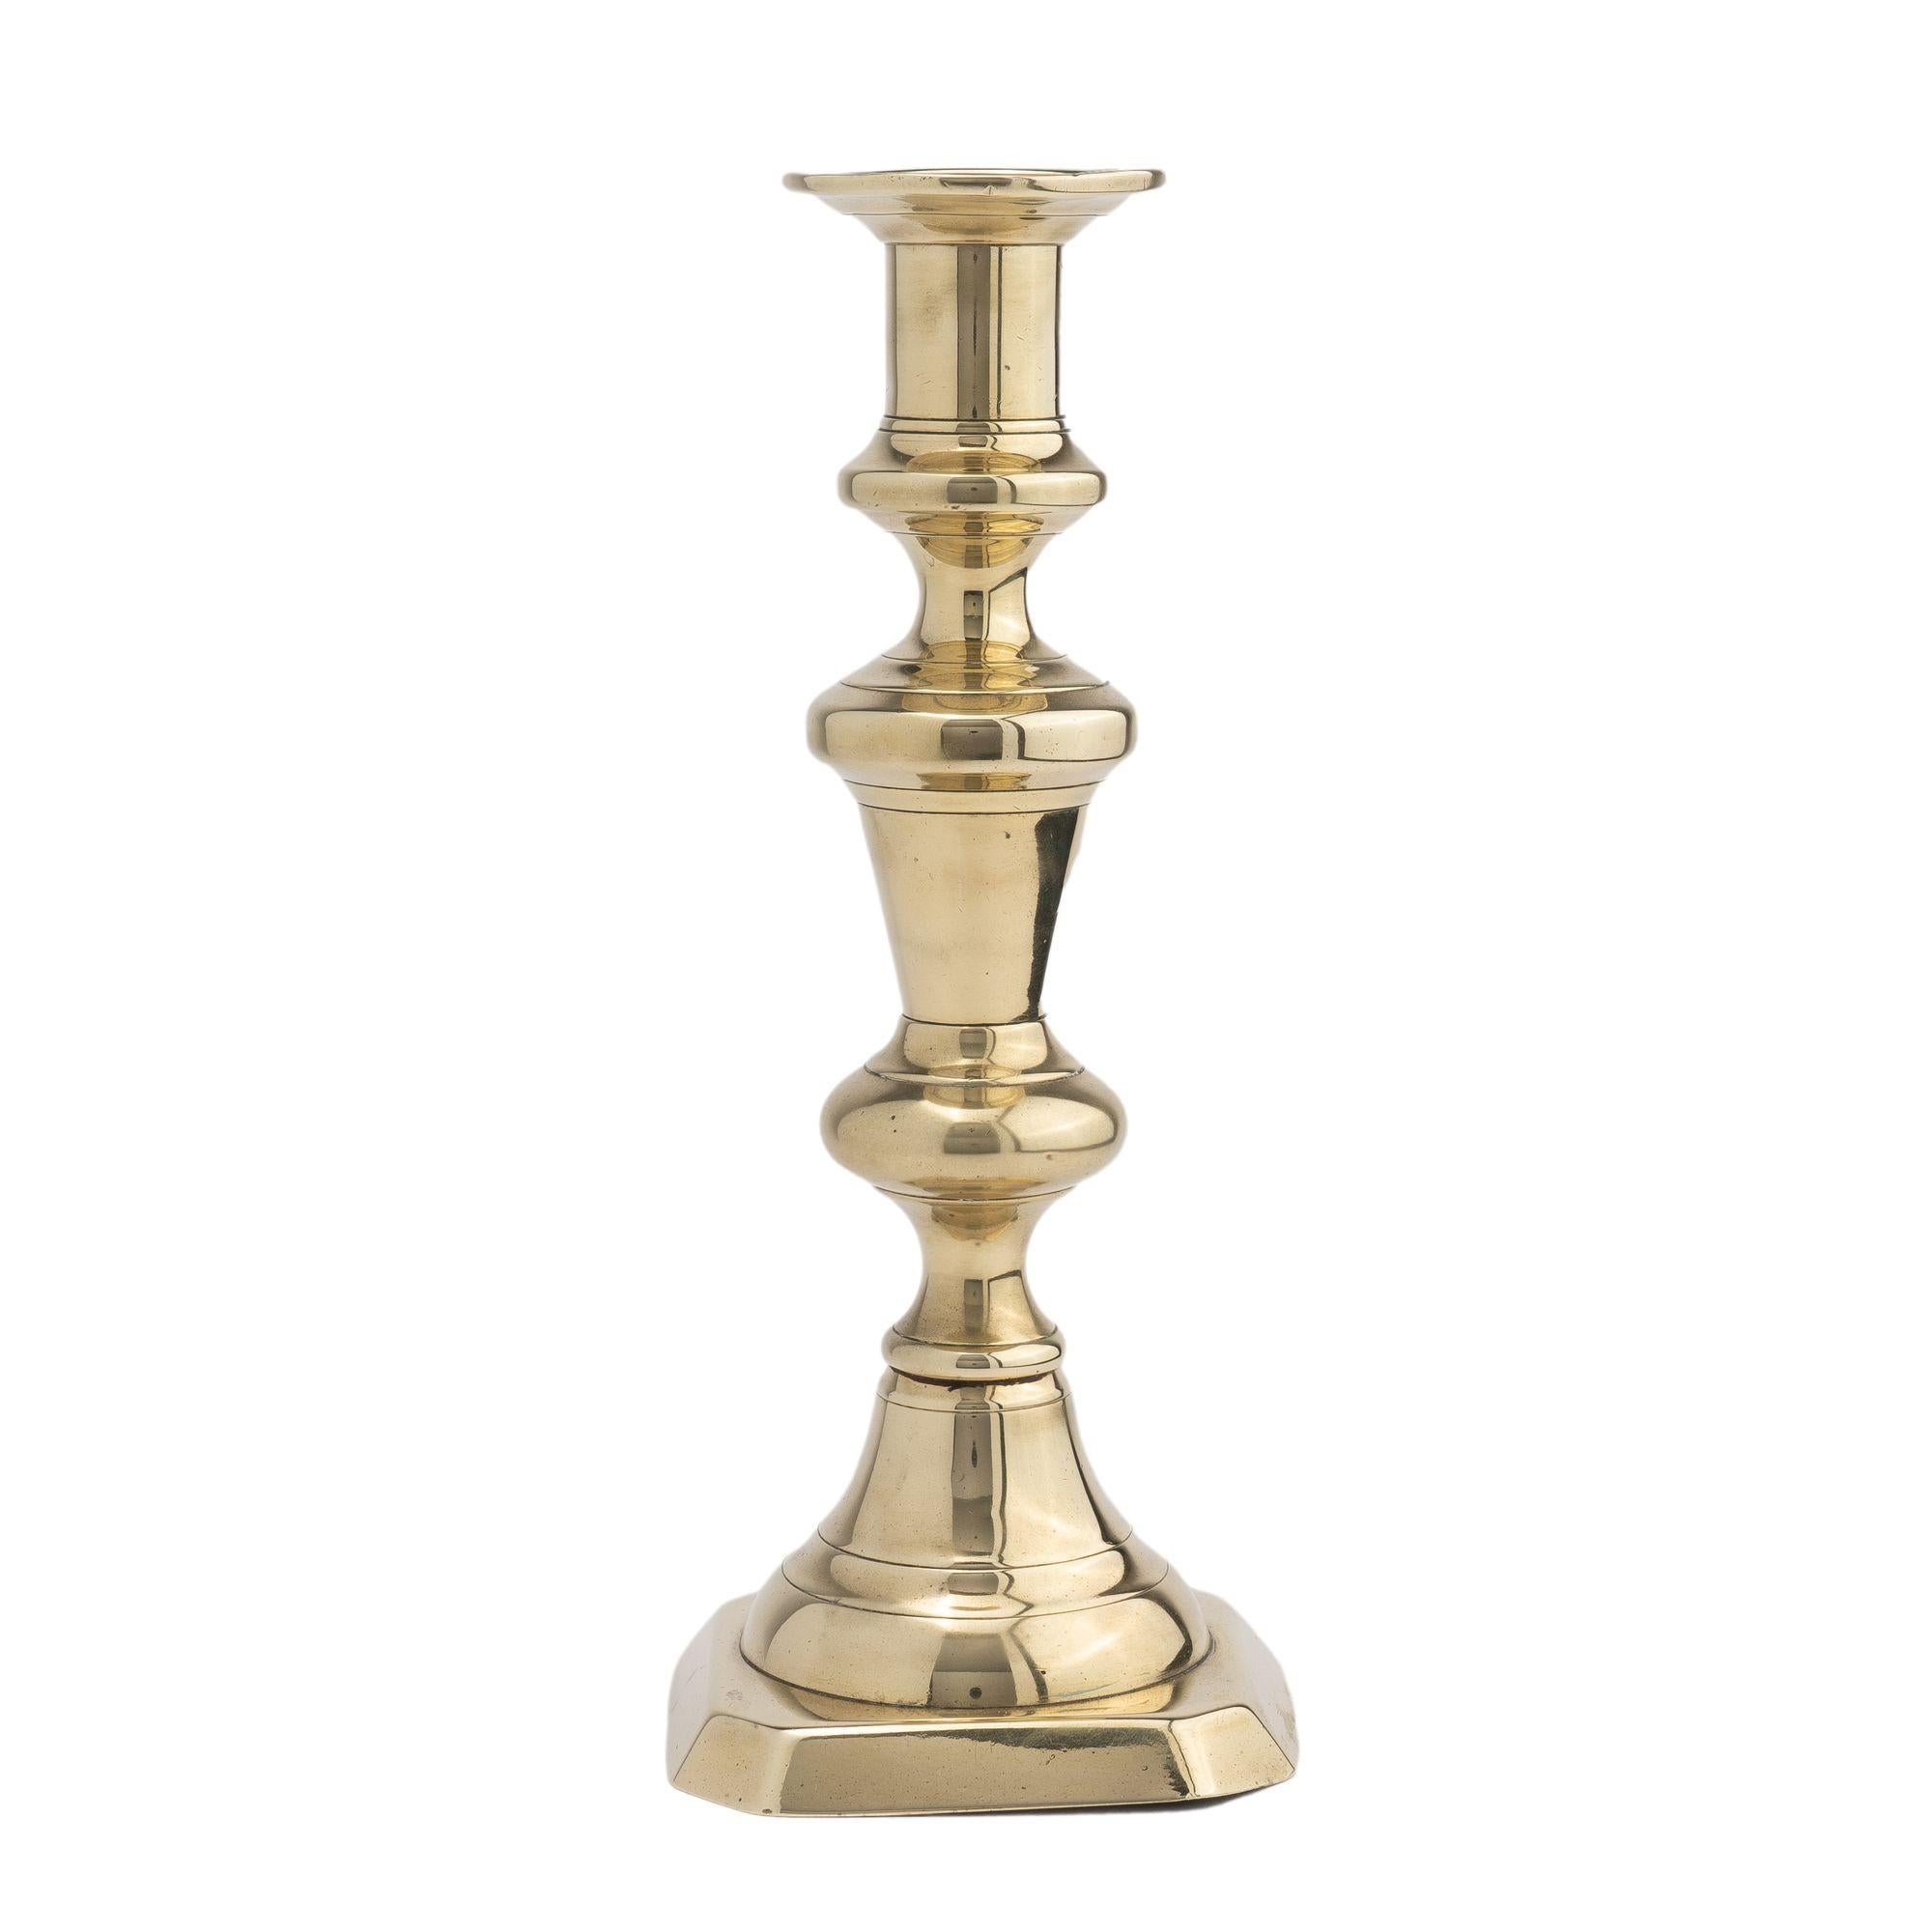 Bold cast brass baluster candlestick with cup and bobeshe. The candle shaft is fitted with an internal push up candle ejector and the candle shaft is peened to a raised square base with cut corners.

Birmingham, England, circa 1830.